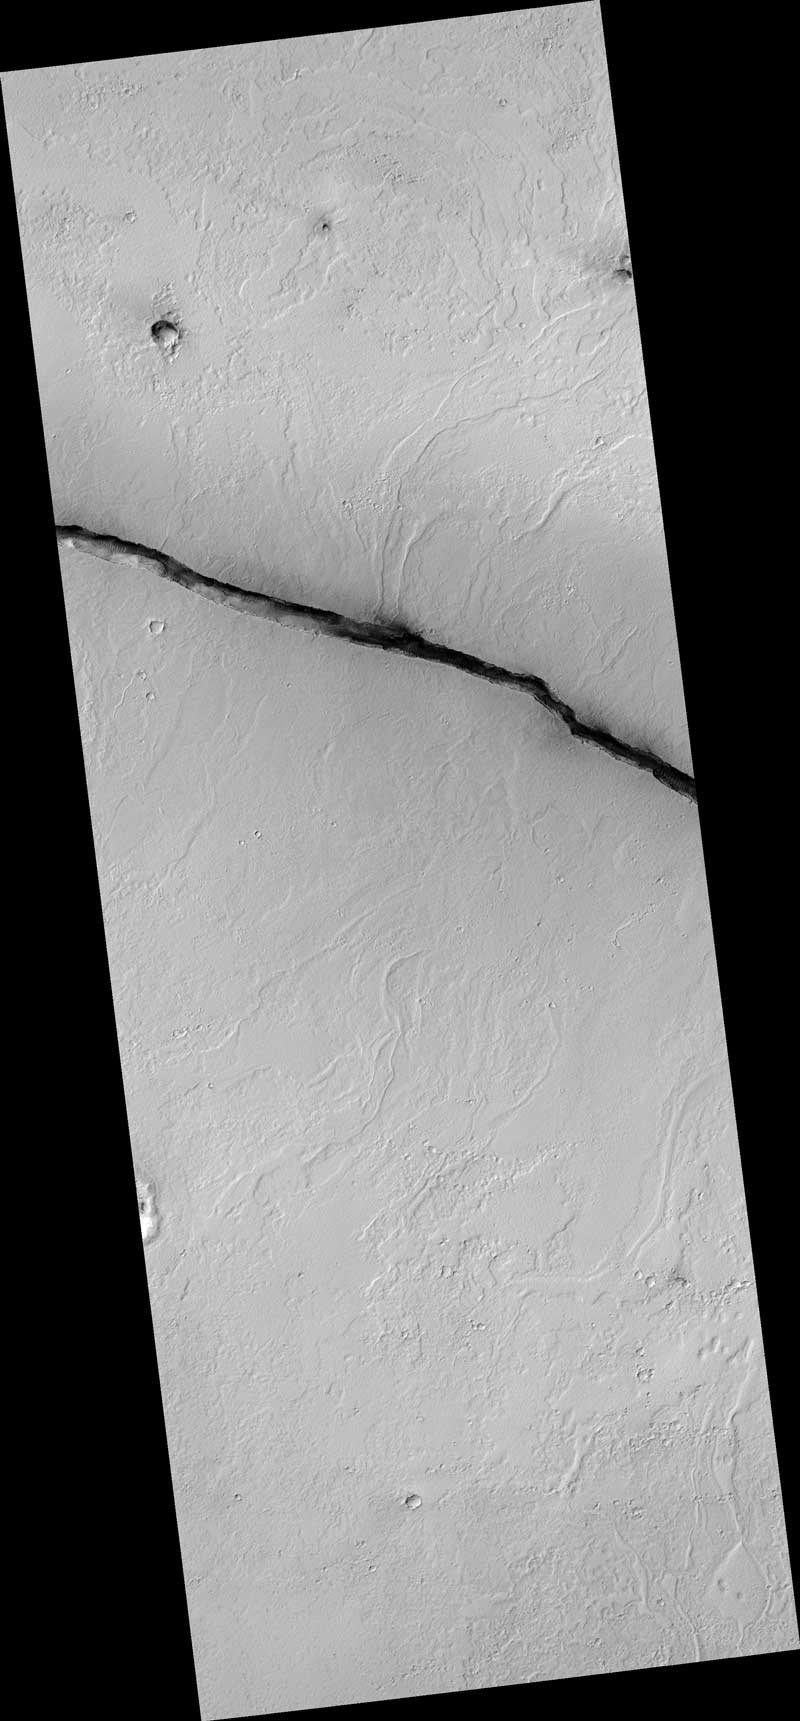 The linearity of the volcanic vent shown in this HiRISE image, in conjunction with evidence of lava flow from the vent, suggests control by combined volcano-tectonic processes. The details of this vent gained by HiRISE should provide insight into those volcano-tectonic processes along Cerberus Fossae fissures in two ways.